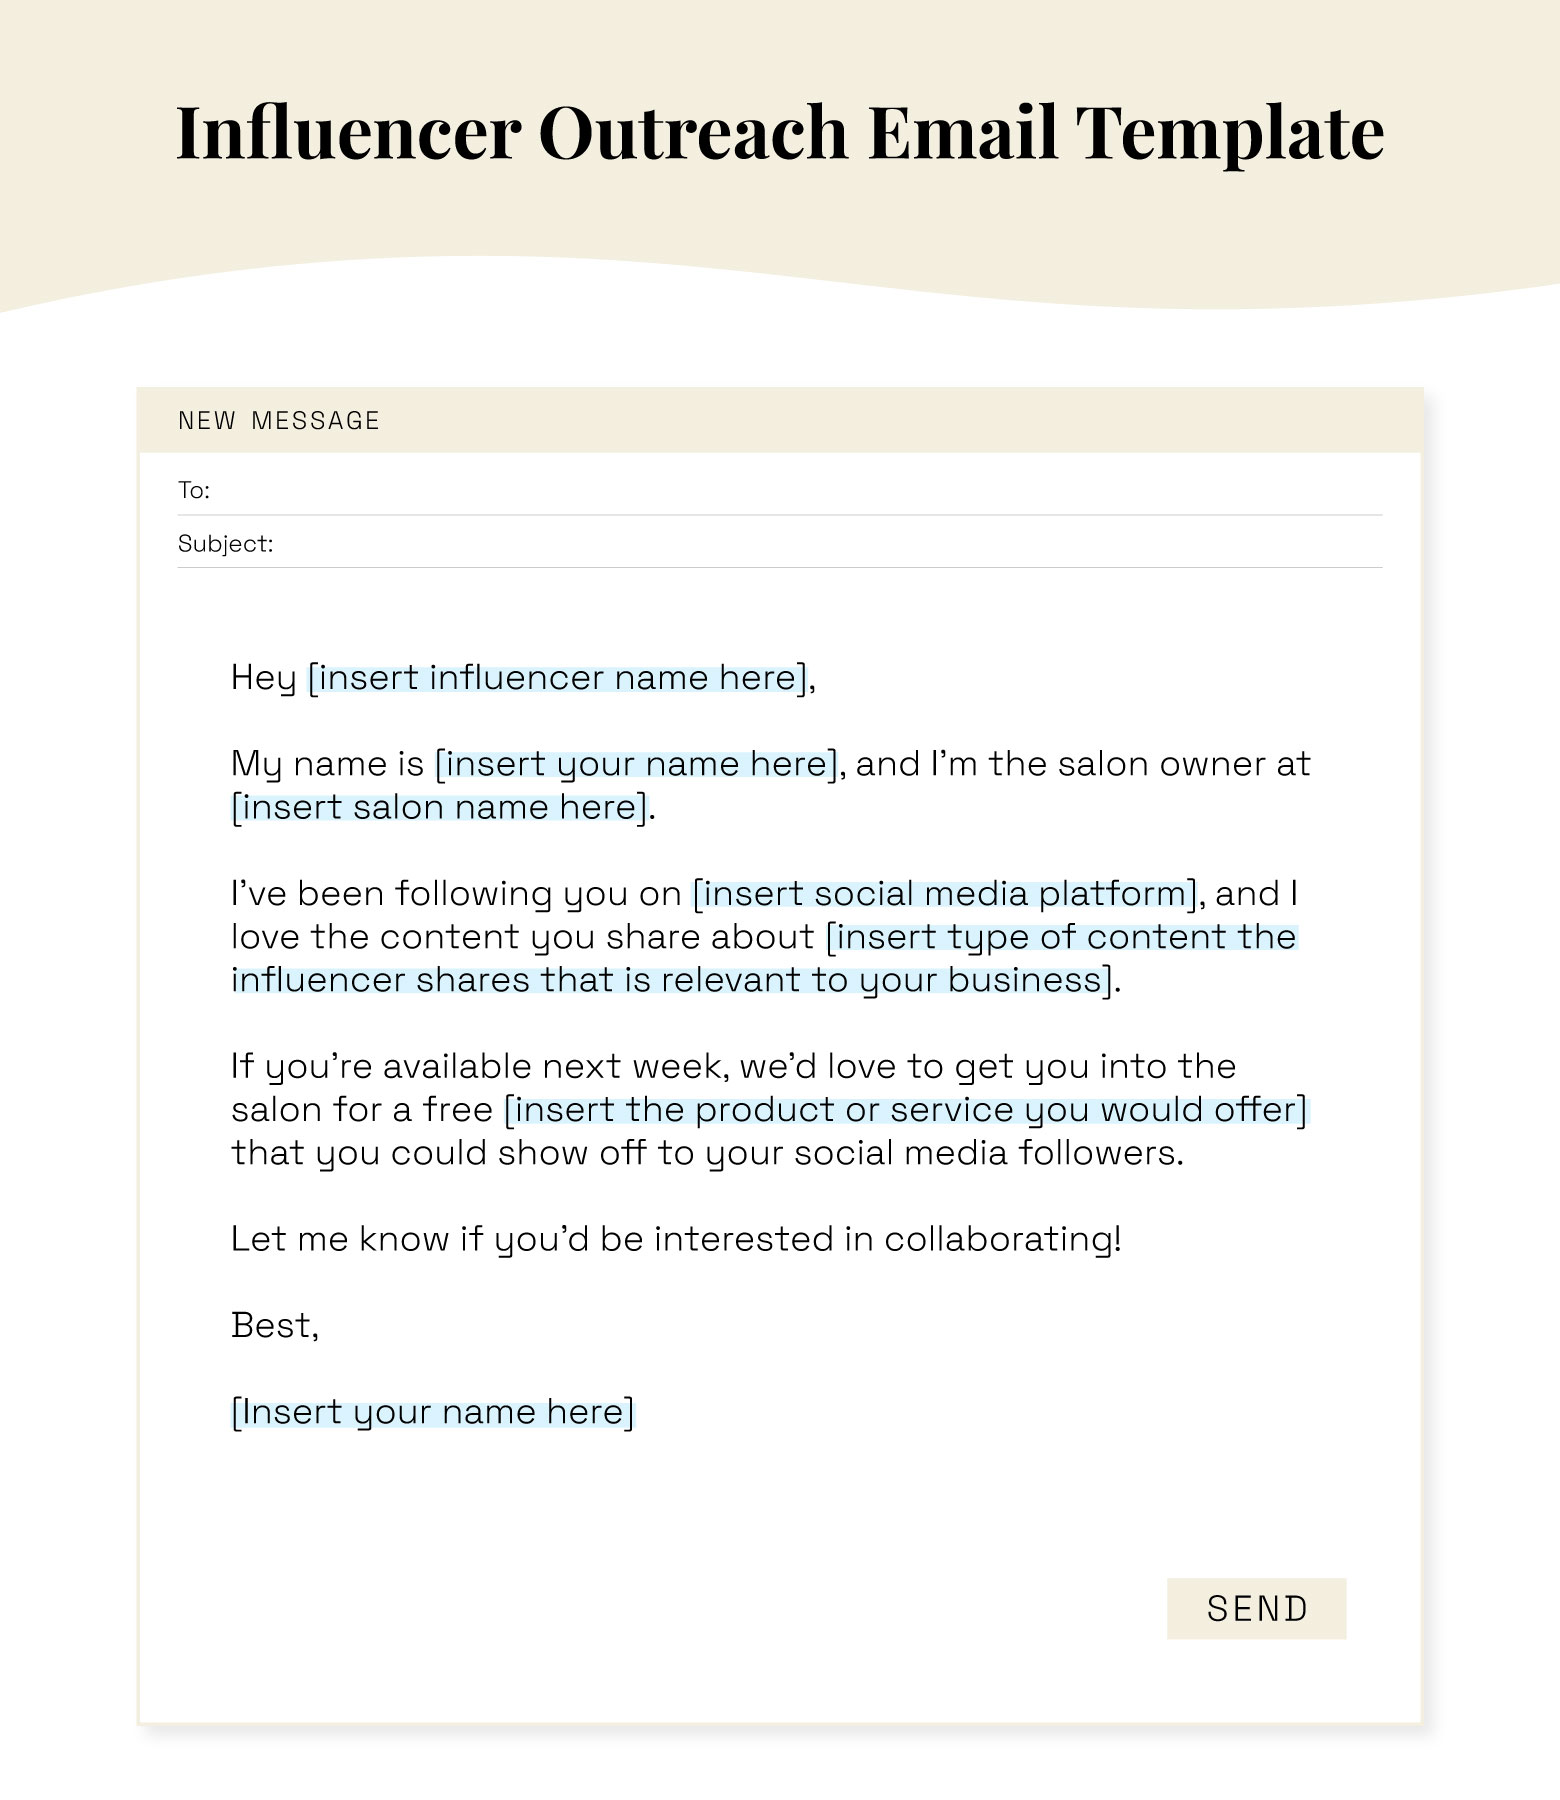 influencer email outreach template